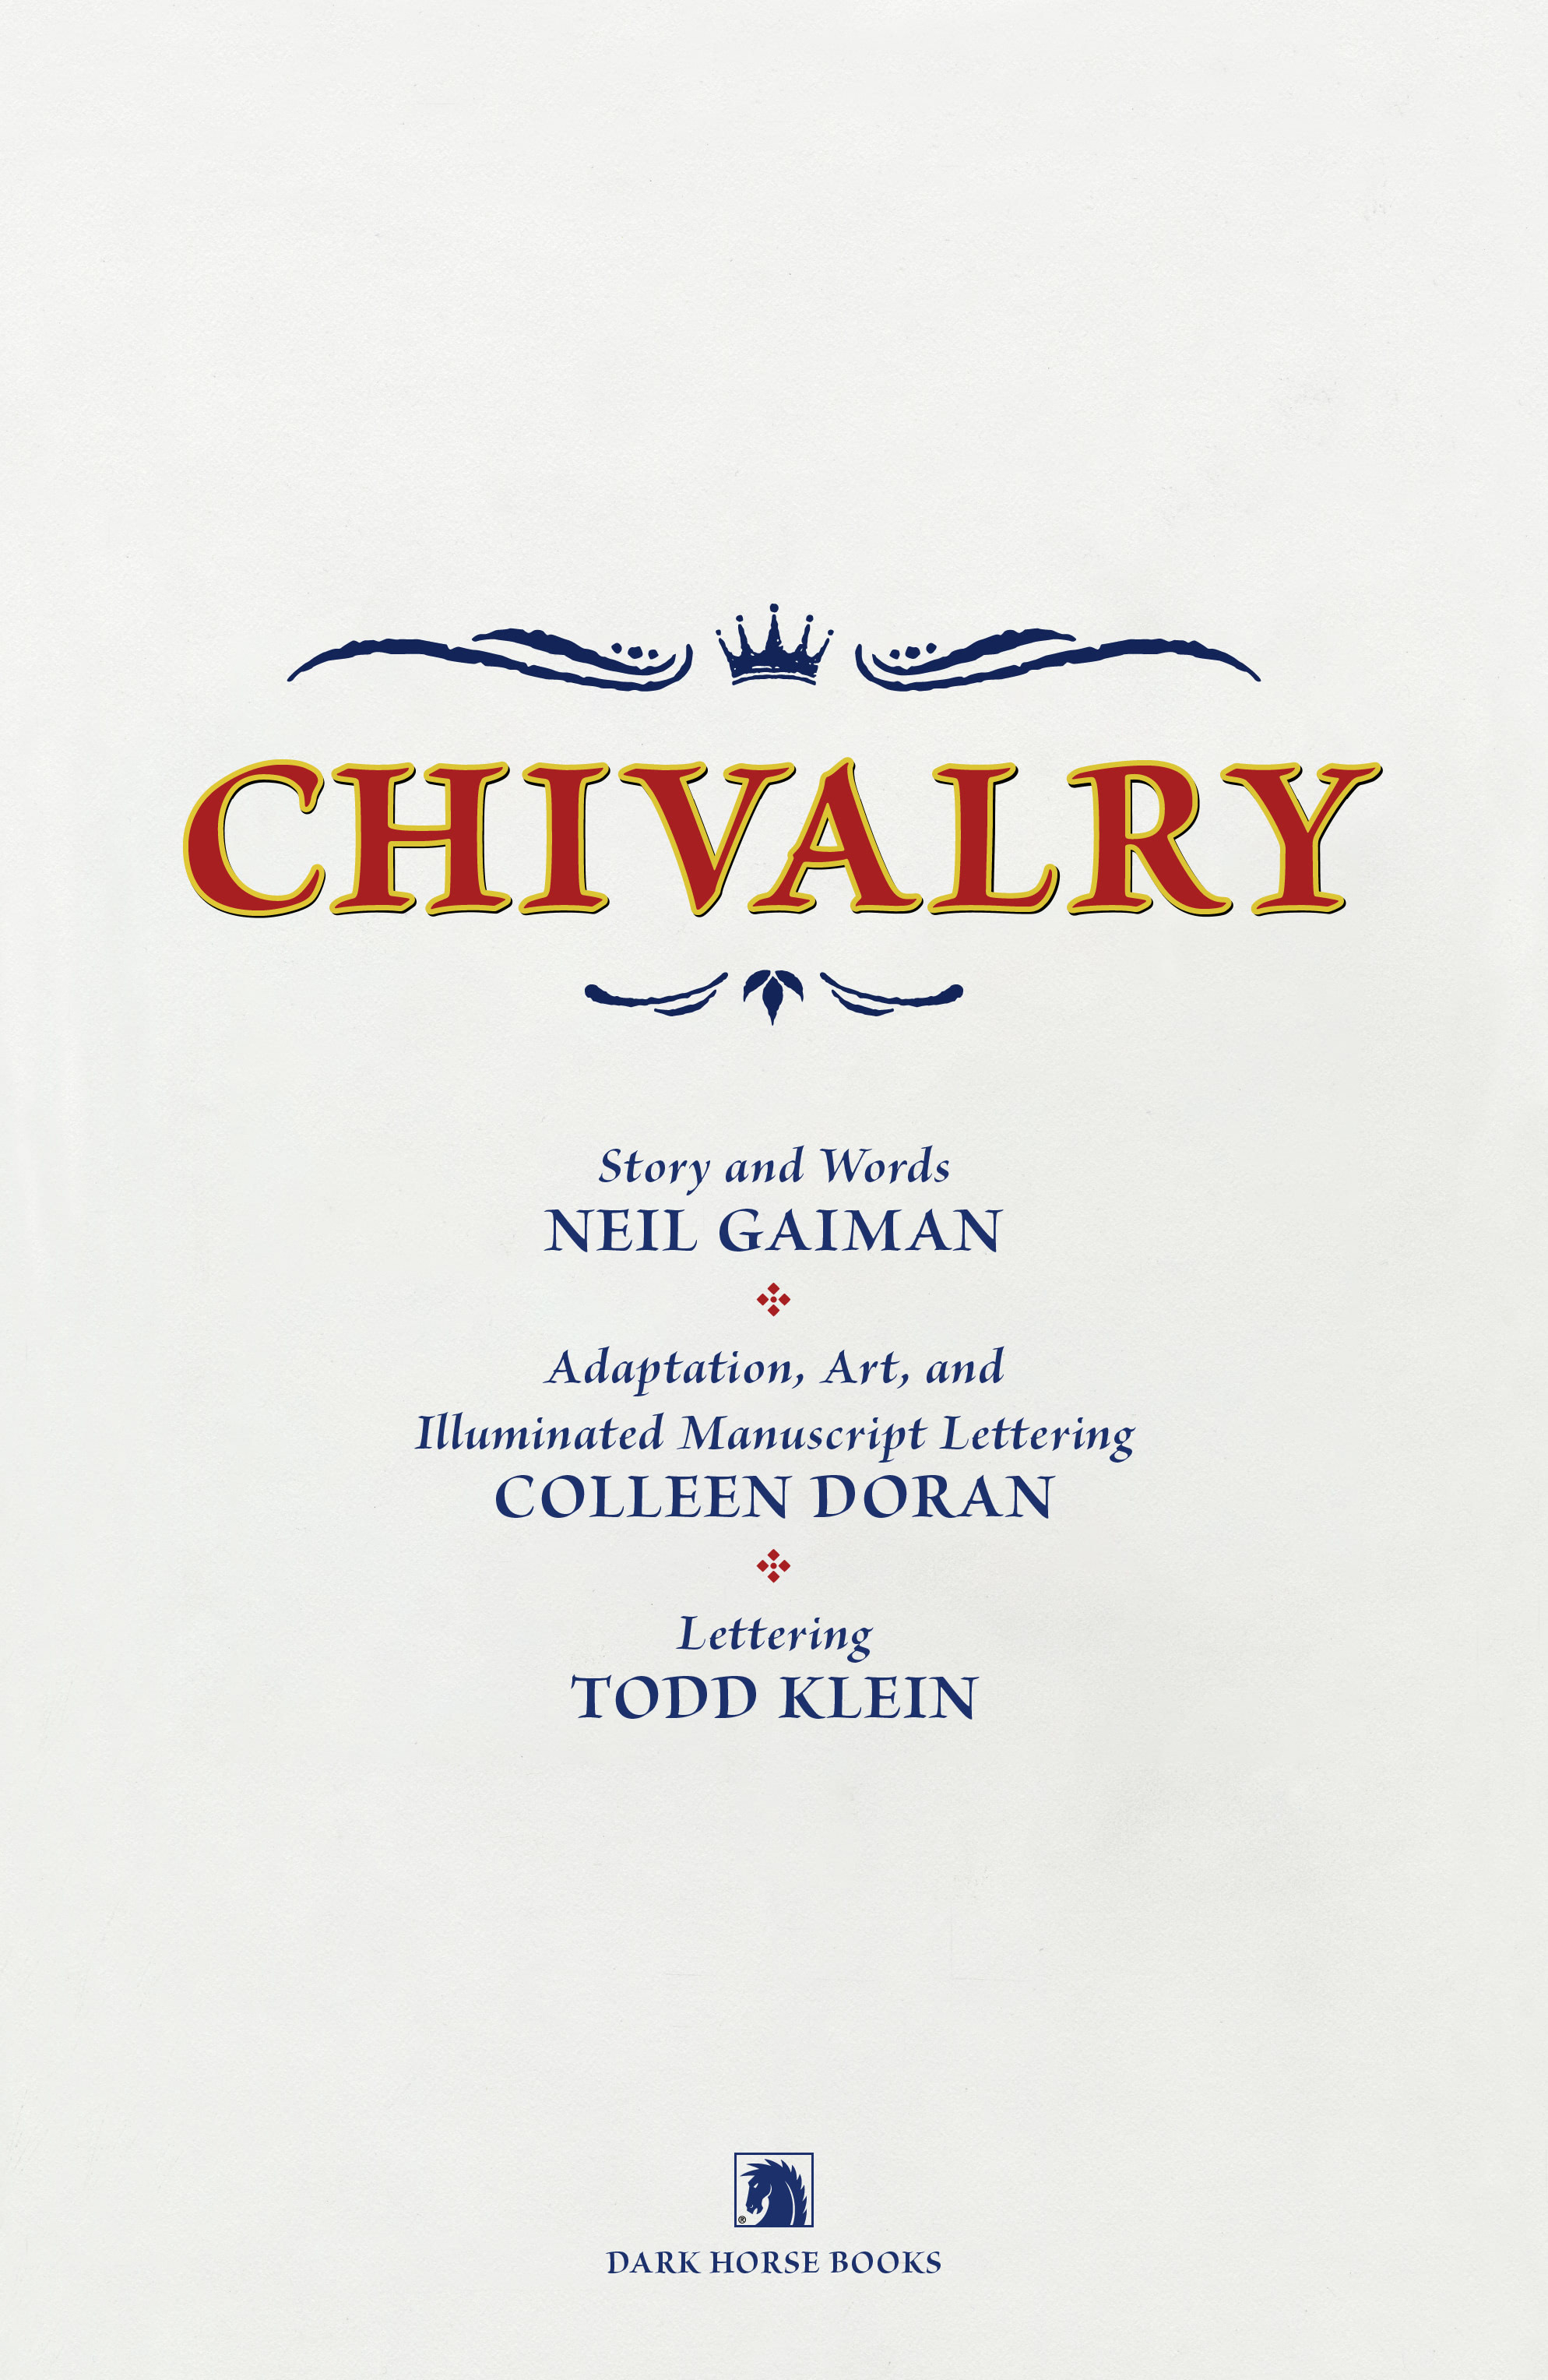 Read online Chivalry comic -  Issue # TPB - 4